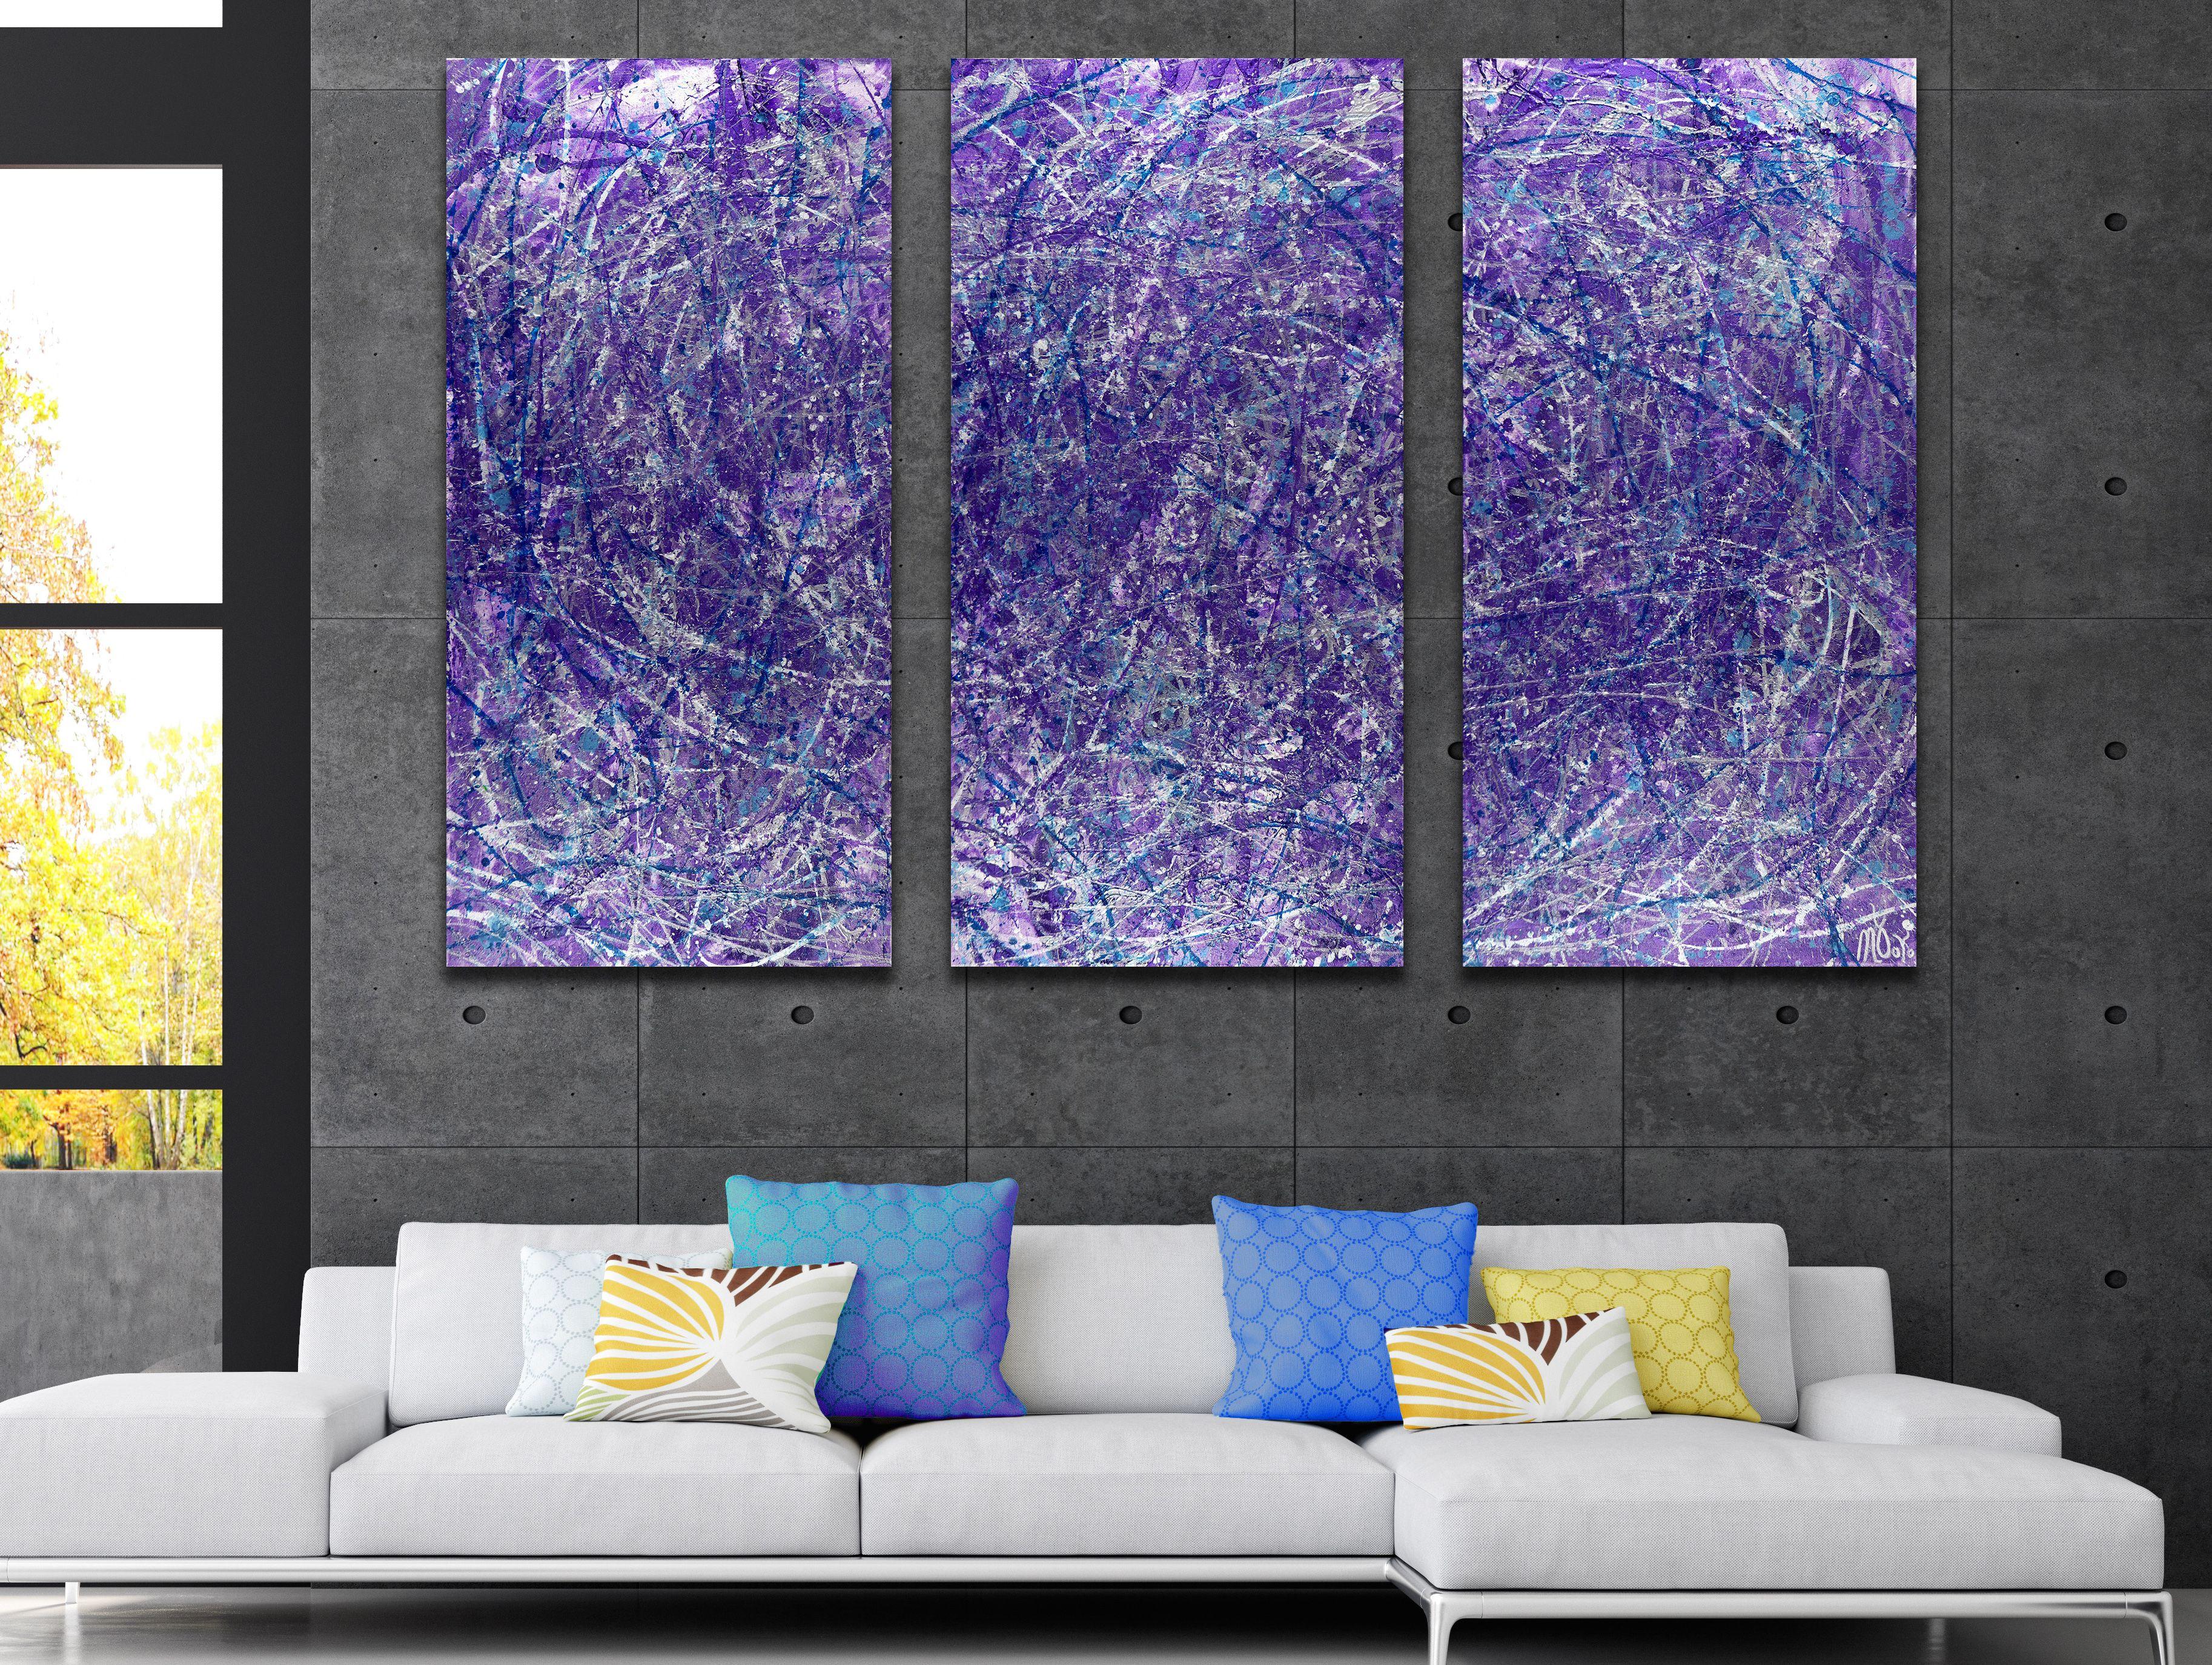 Passionate abstract expressionistic action painting inspired by Pollock. Layers of paint, Purple, iridescent purple , Prussian blue and silver. Large statement artwork. Signed on the front of the second canvas.    This artwork is a multi canvas